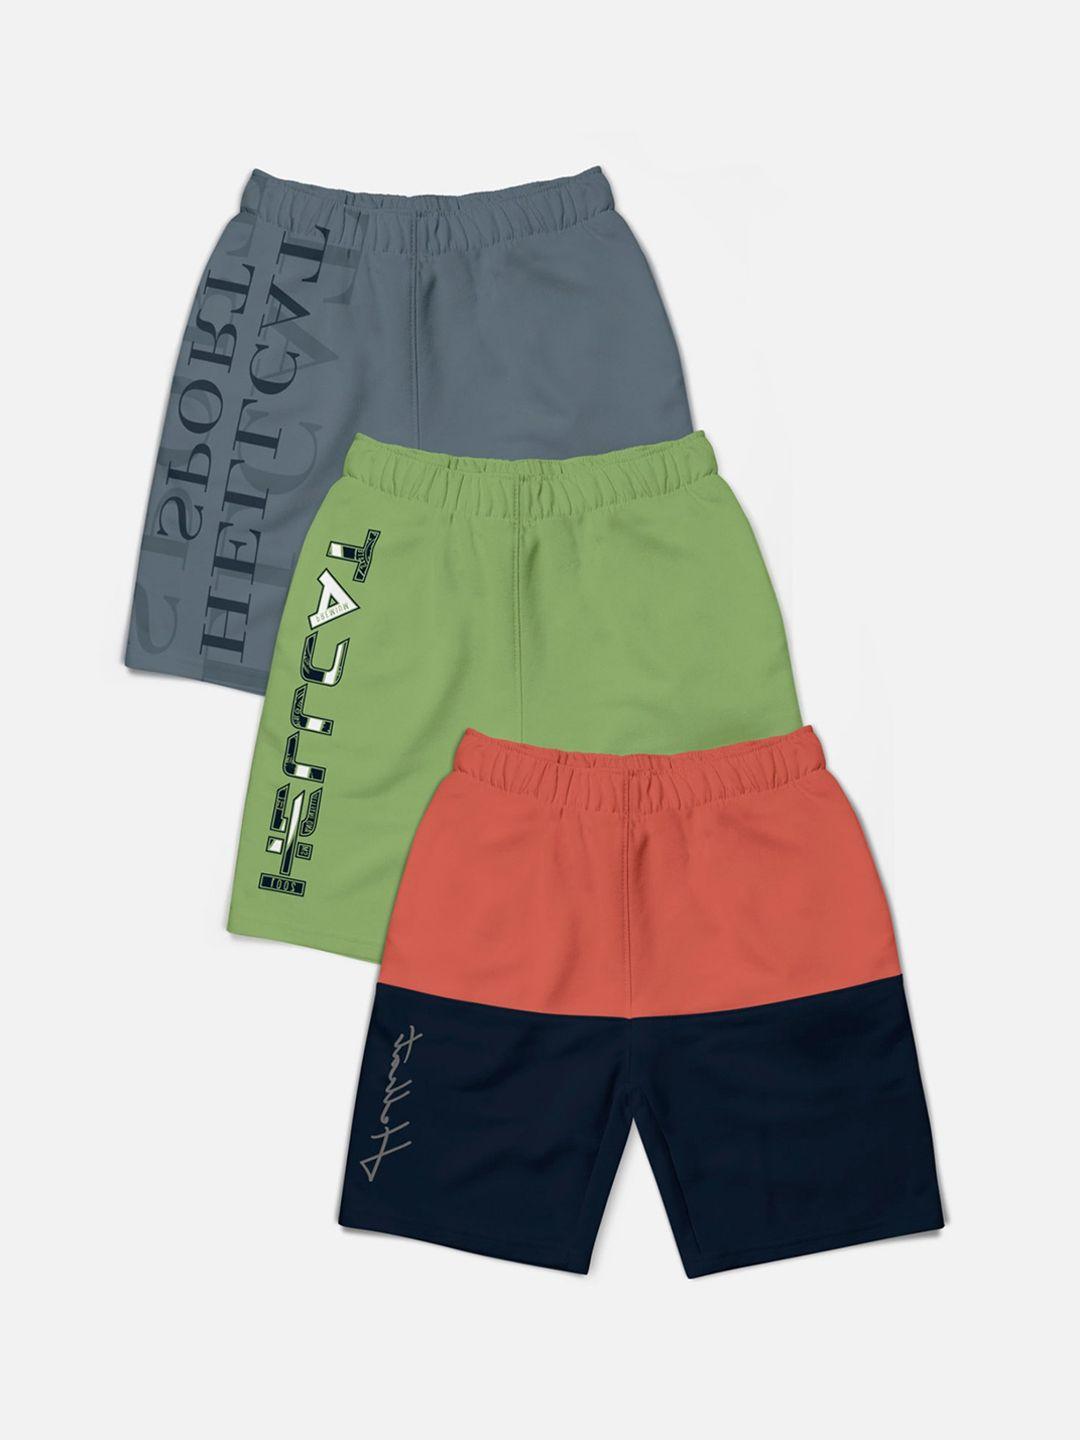 hellcat boys pack of 3 mid-rise colourblocked printed cotton shorts